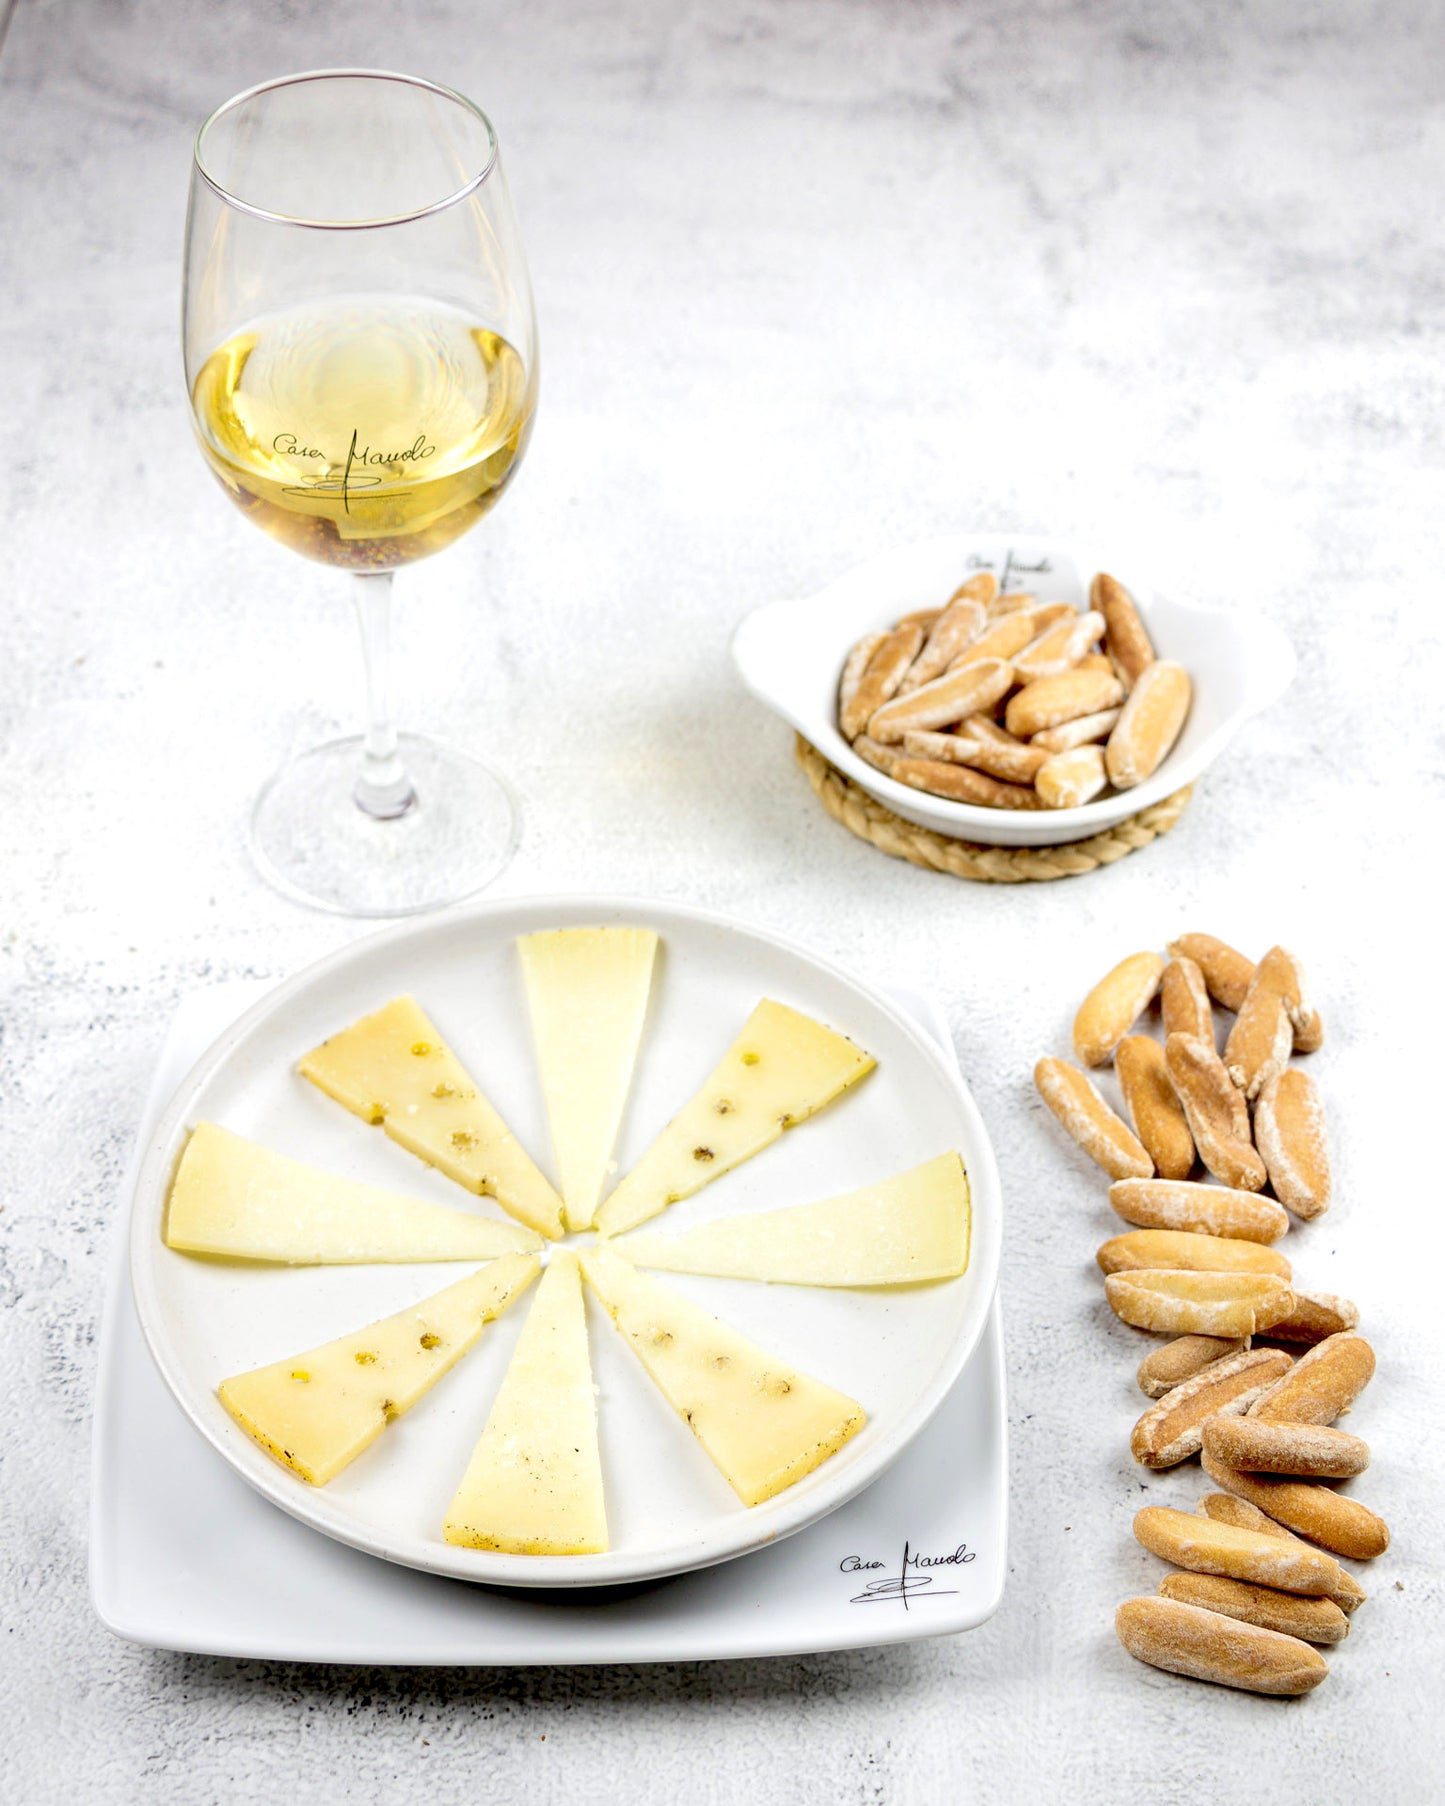 Manchego Cheese With Black Truffle Slices